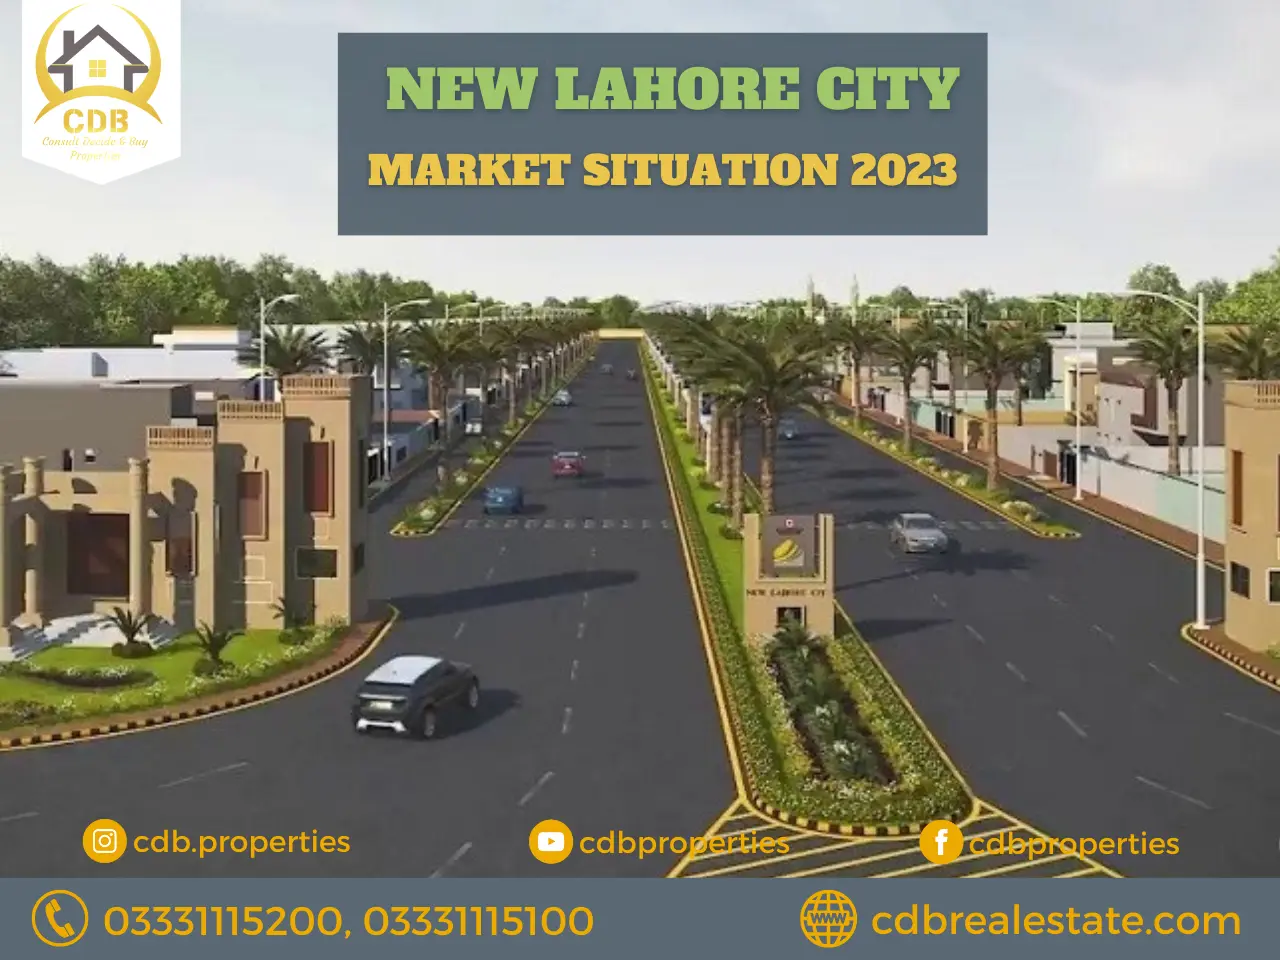 New Lahore City Market Situation In March 2023